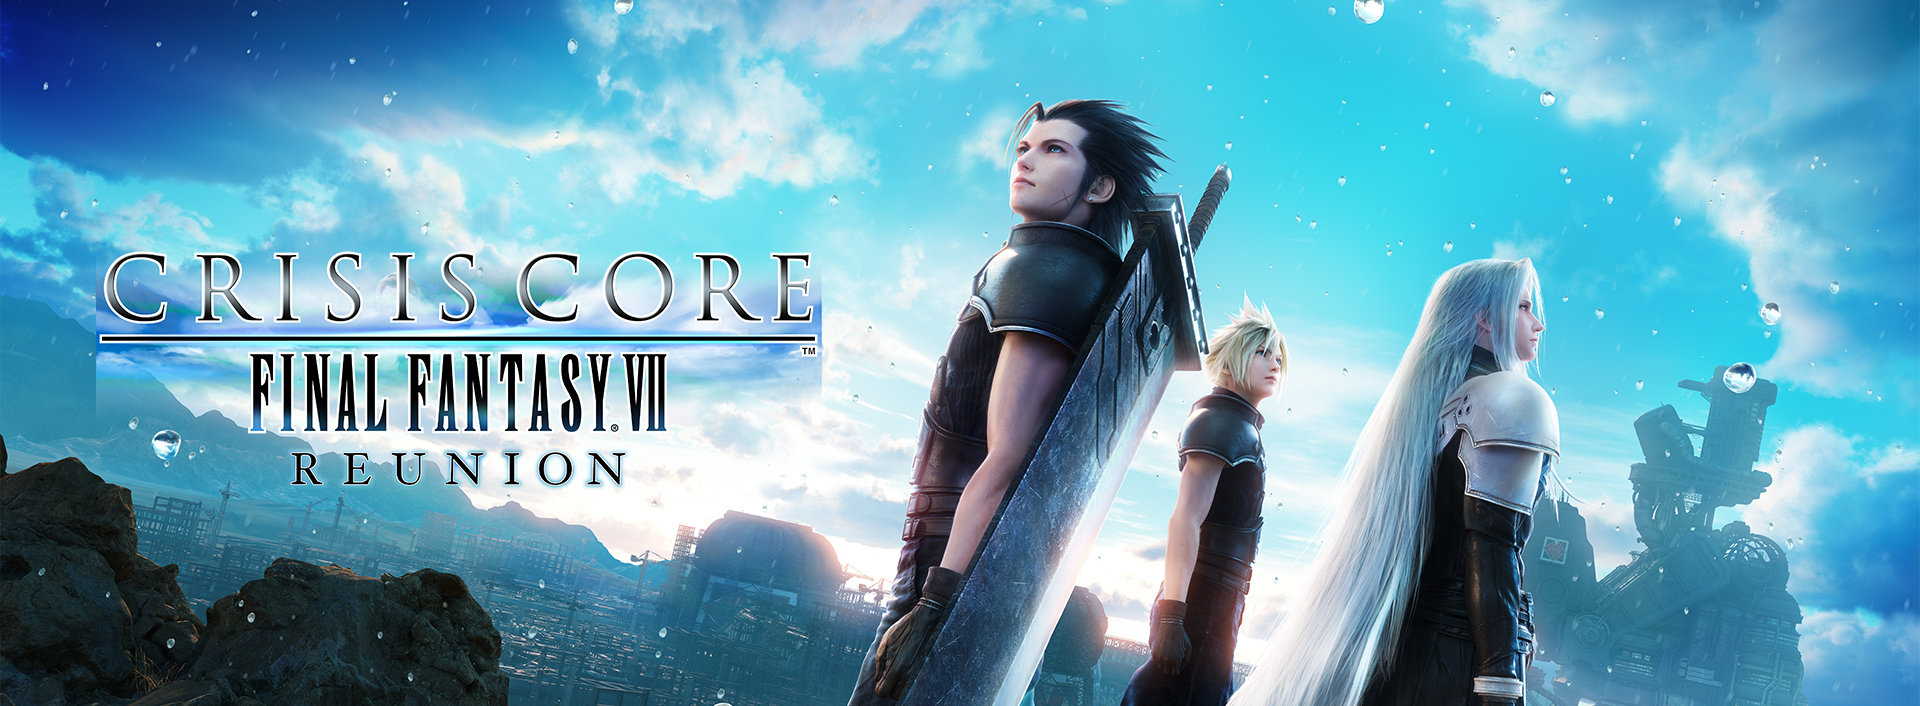 CRISIS CORE -FINAL FANTASY VII- REUNION Available Today